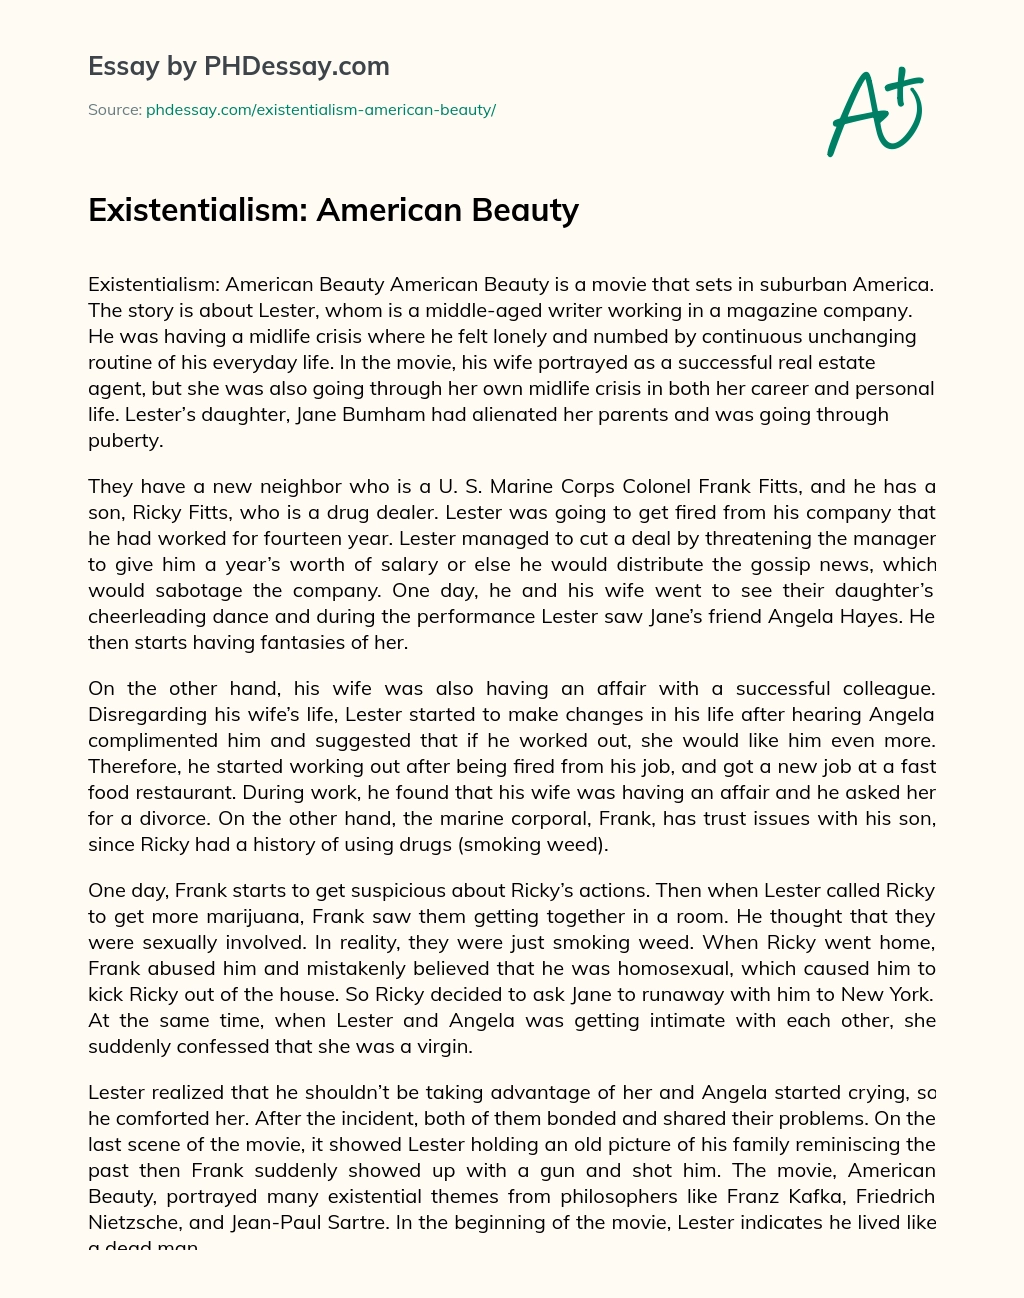 Existentialism: American Beauty essay